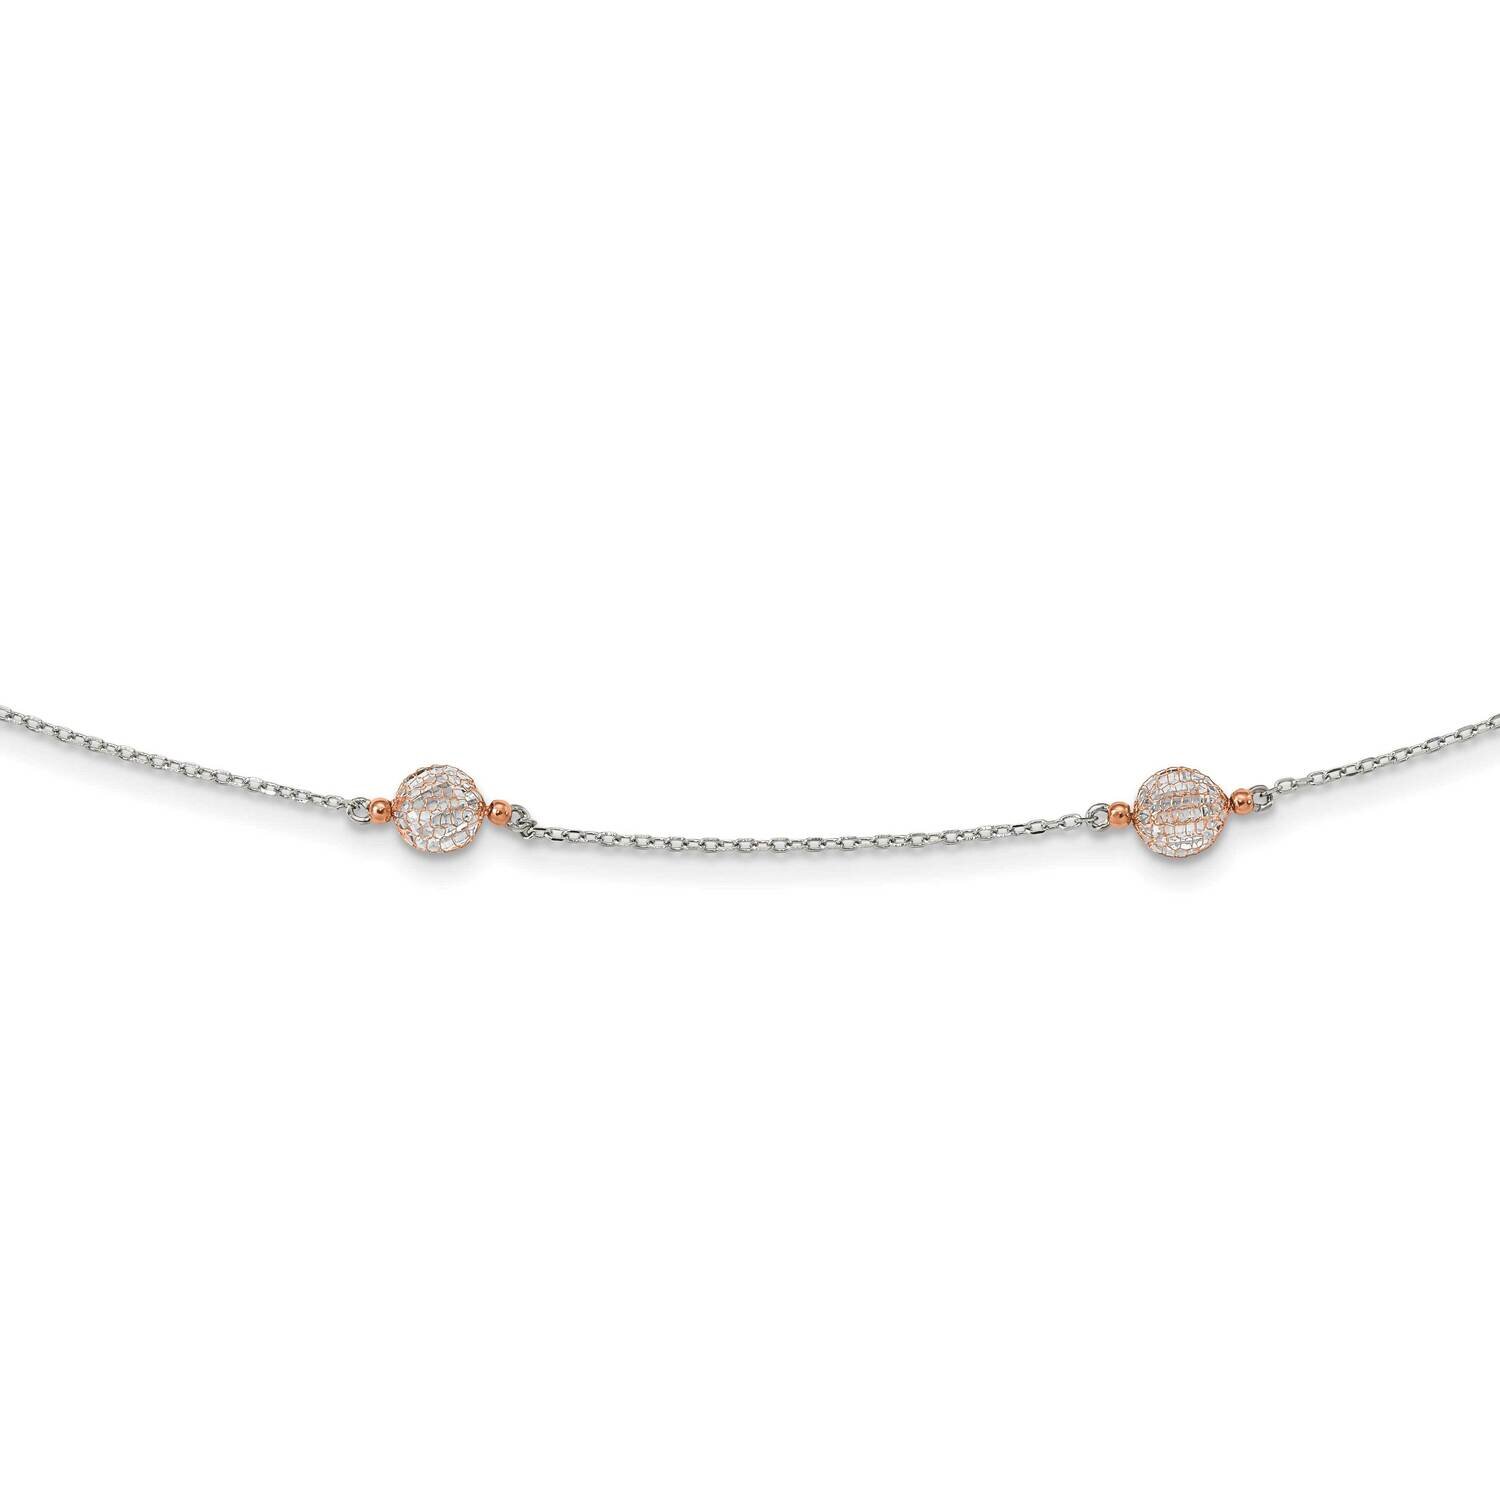 Rose Tone CZ Stations with 2 Inch Extension Necklace Sterling Silver Rhodium-Plated QG5982-37